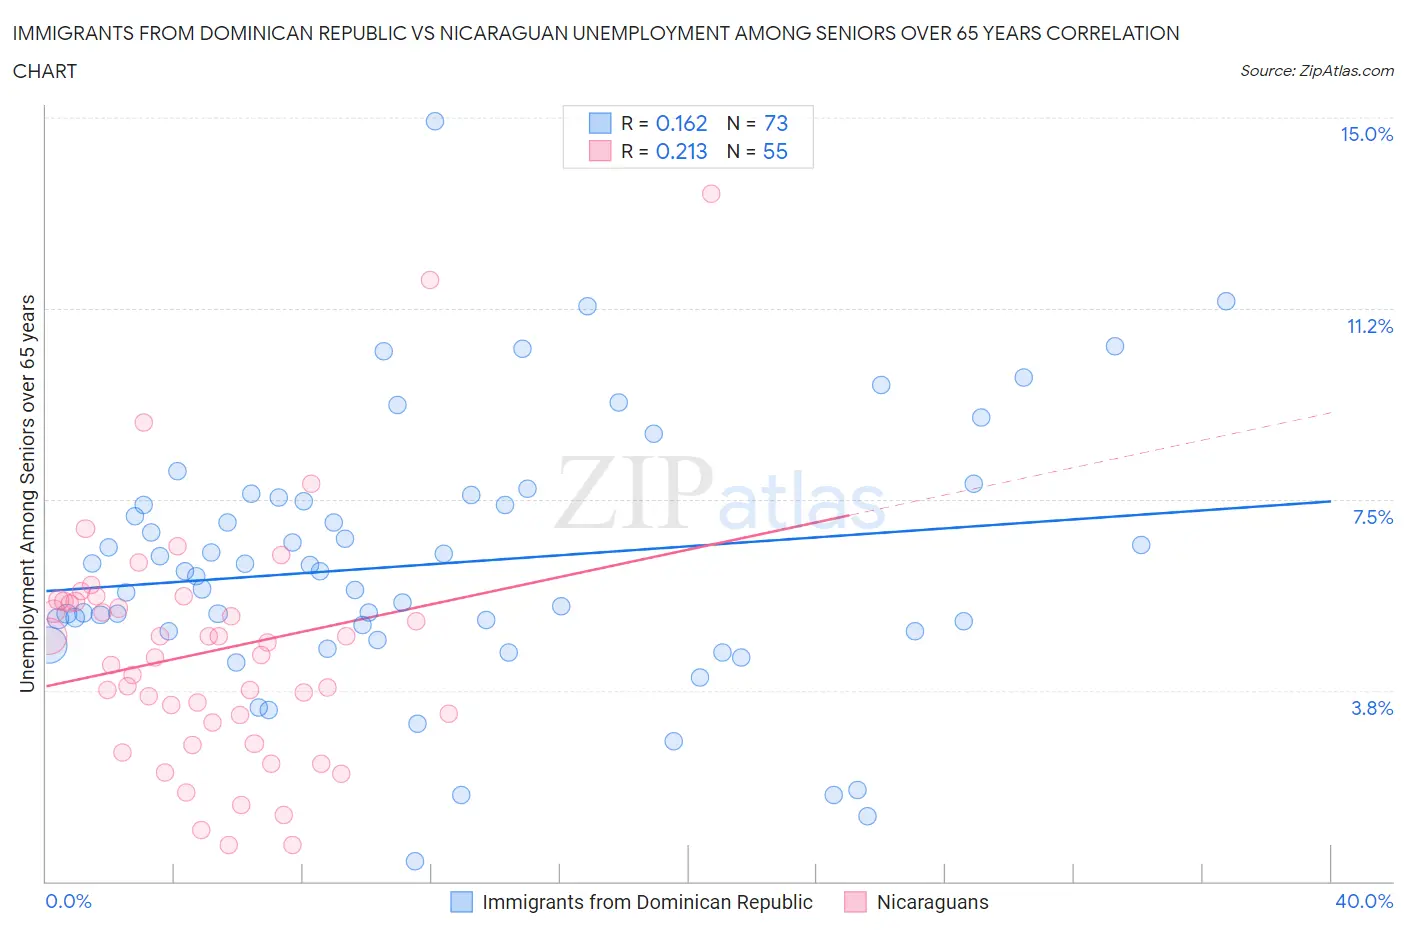 Immigrants from Dominican Republic vs Nicaraguan Unemployment Among Seniors over 65 years